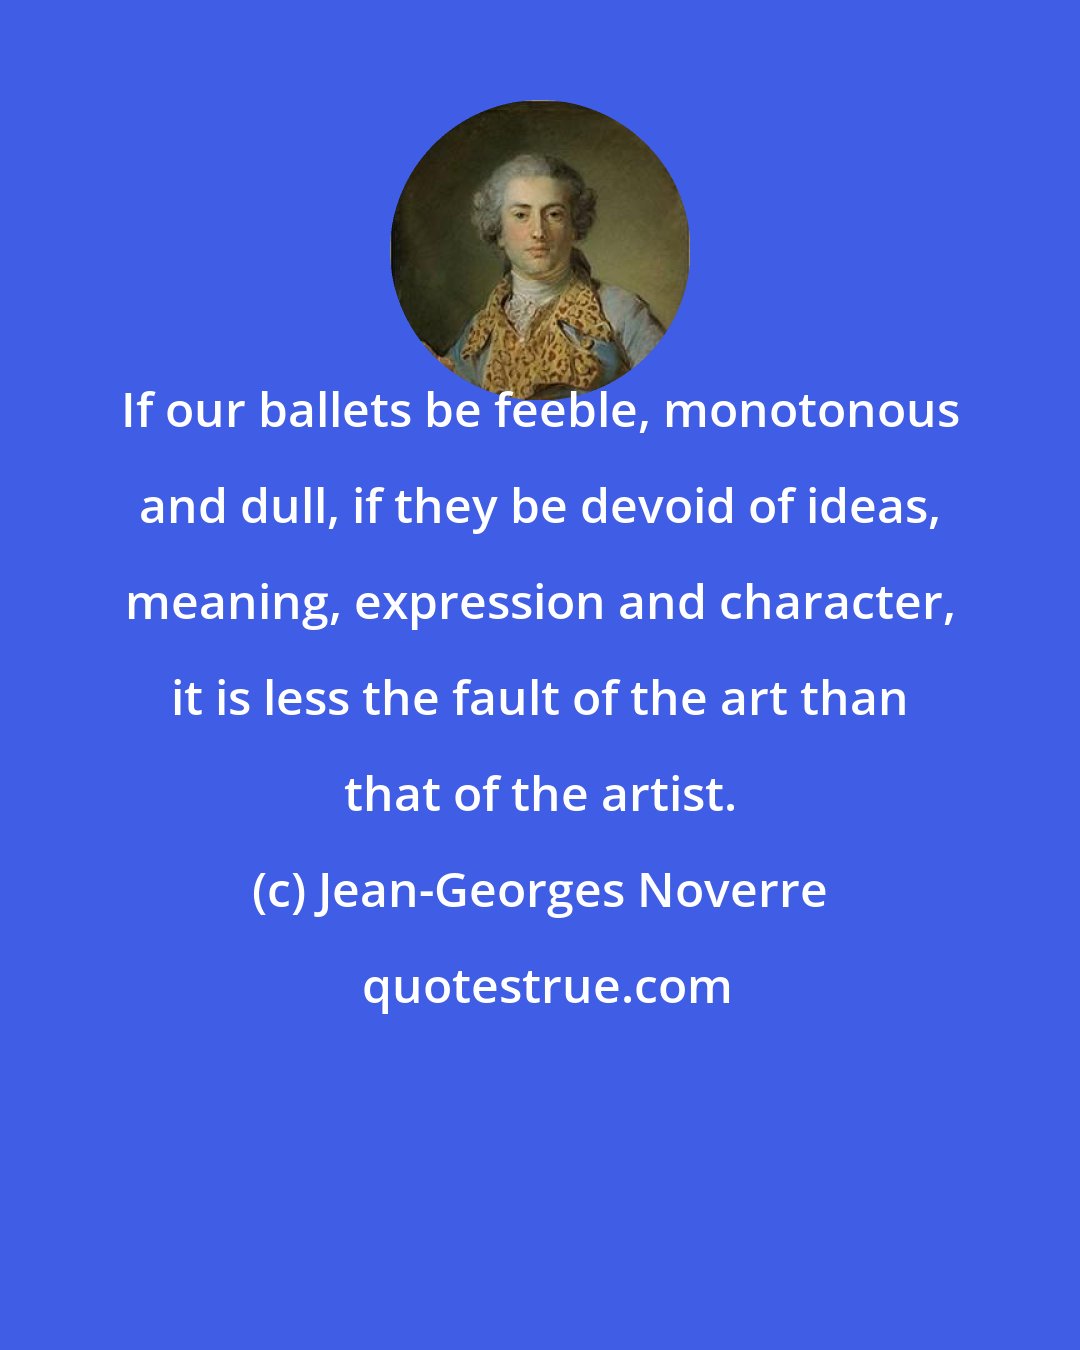 Jean-Georges Noverre: If our ballets be feeble, monotonous and dull, if they be devoid of ideas, meaning, expression and character, it is less the fault of the art than that of the artist.